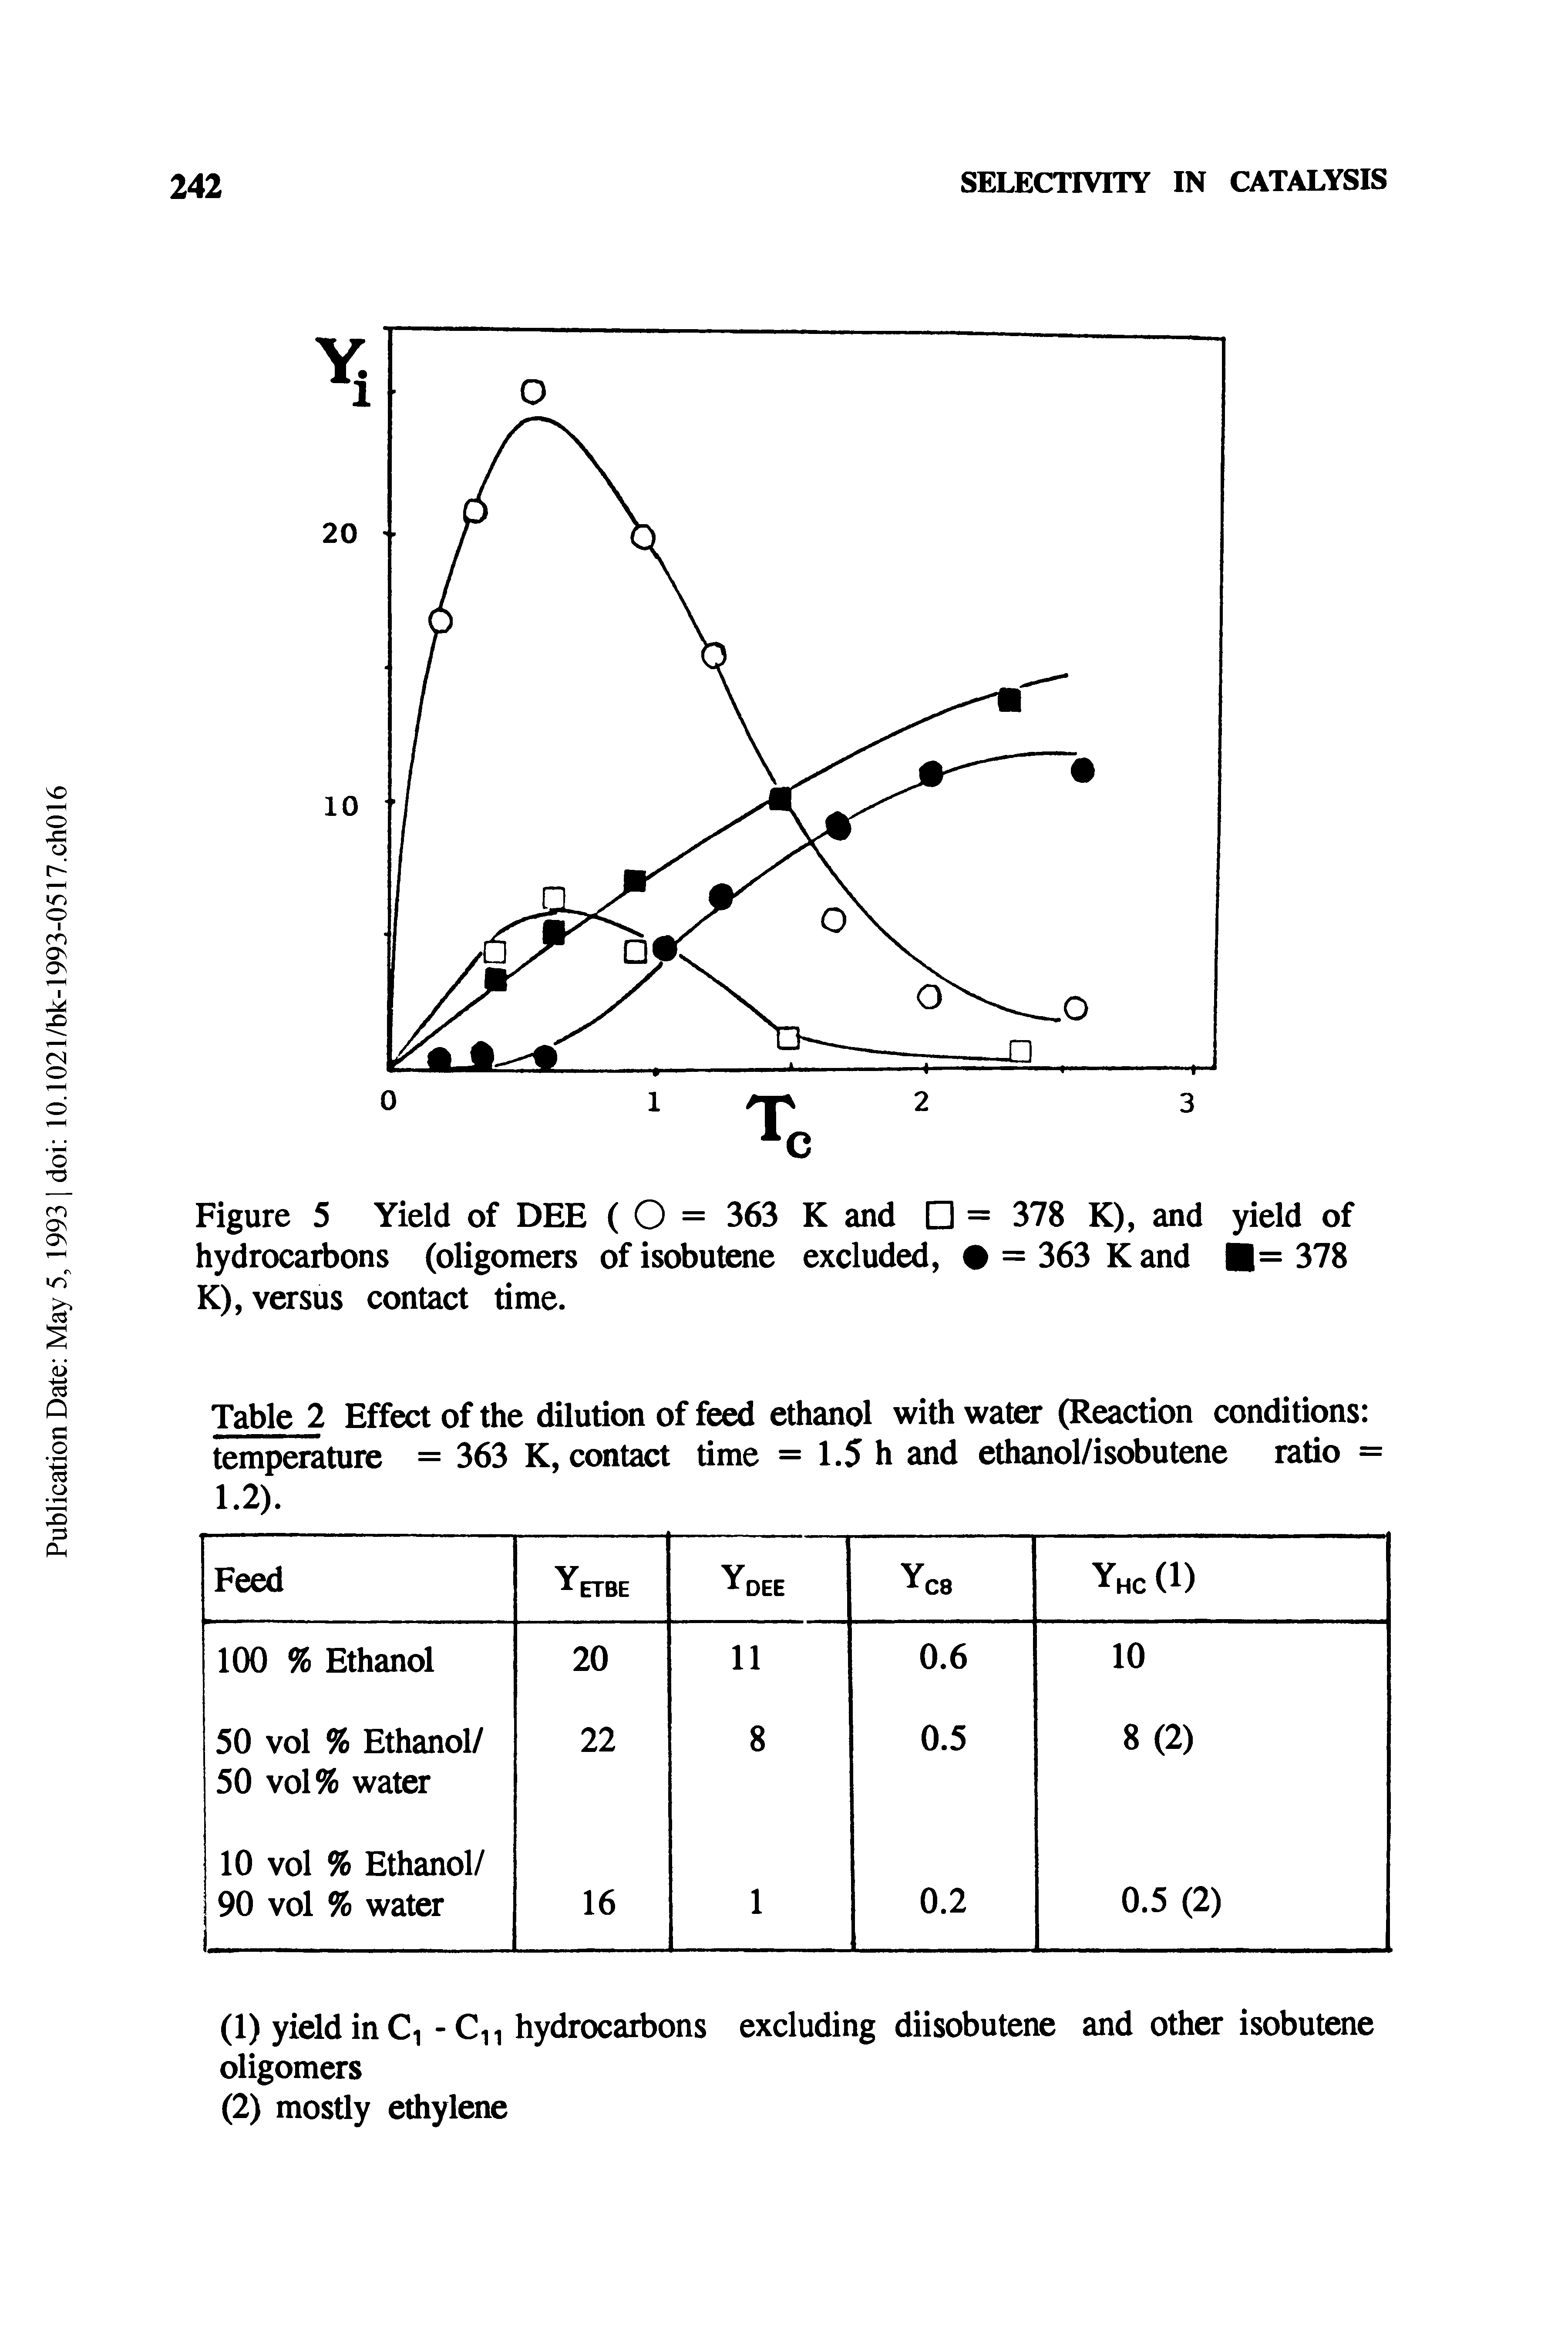 Figure 5 Yield of DEE ( O = 363 K and = 378 K), and yield of hydrocarbons (oligomers of isobutene excluded, = 363 K and = 378 K), versus contact time.